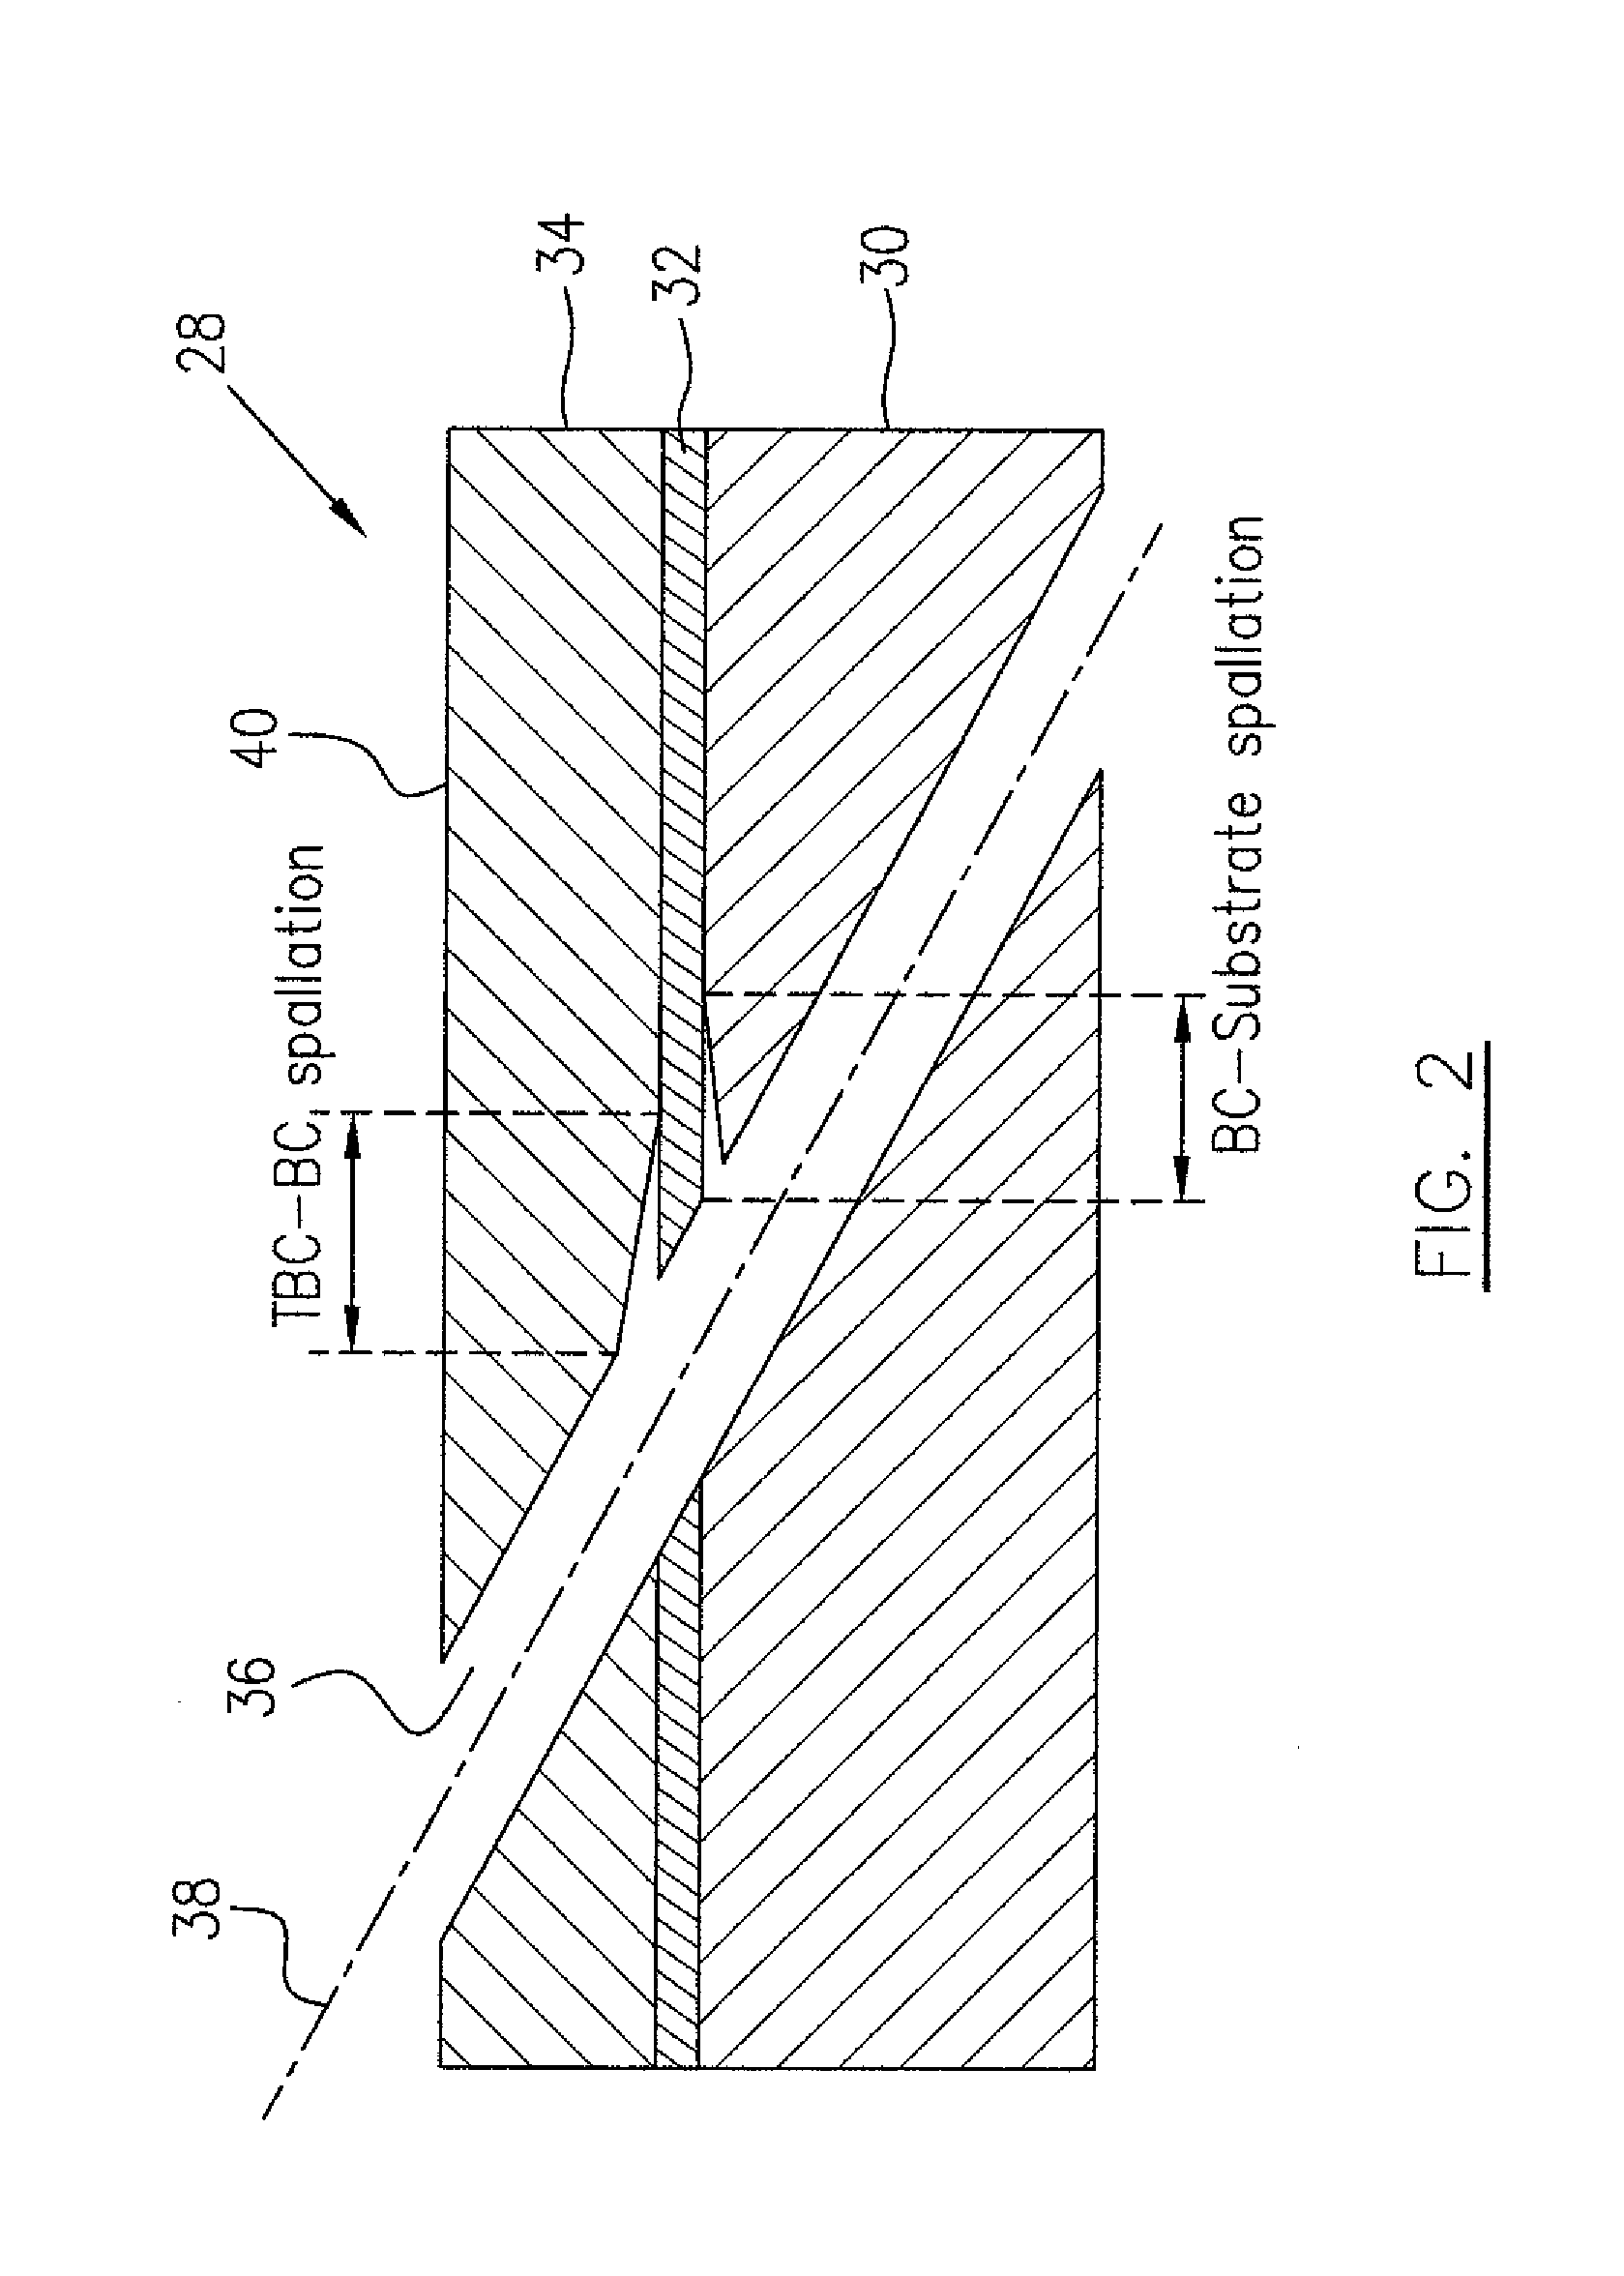 Laser drilling methods of shallow-angled holes